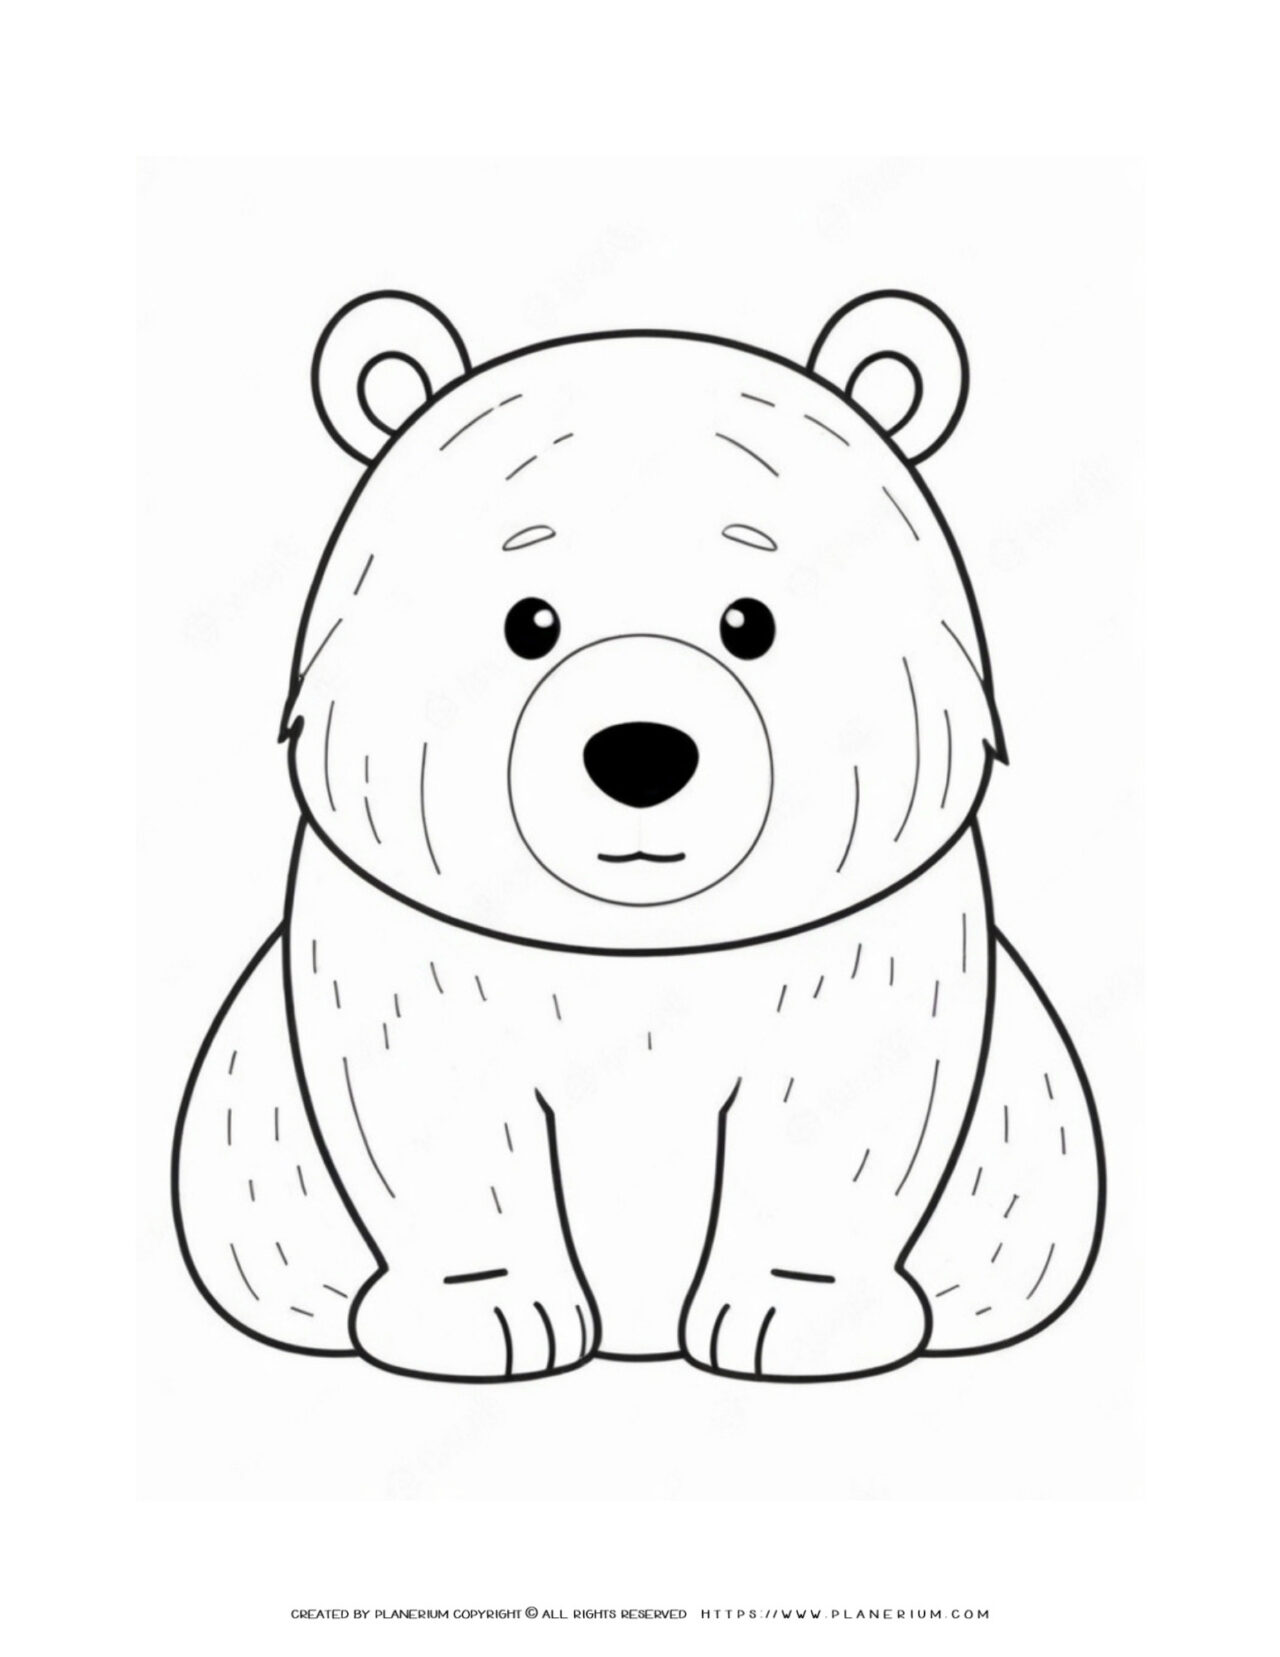 Cute-Bear-Outline-Sitting-Coloring-Page